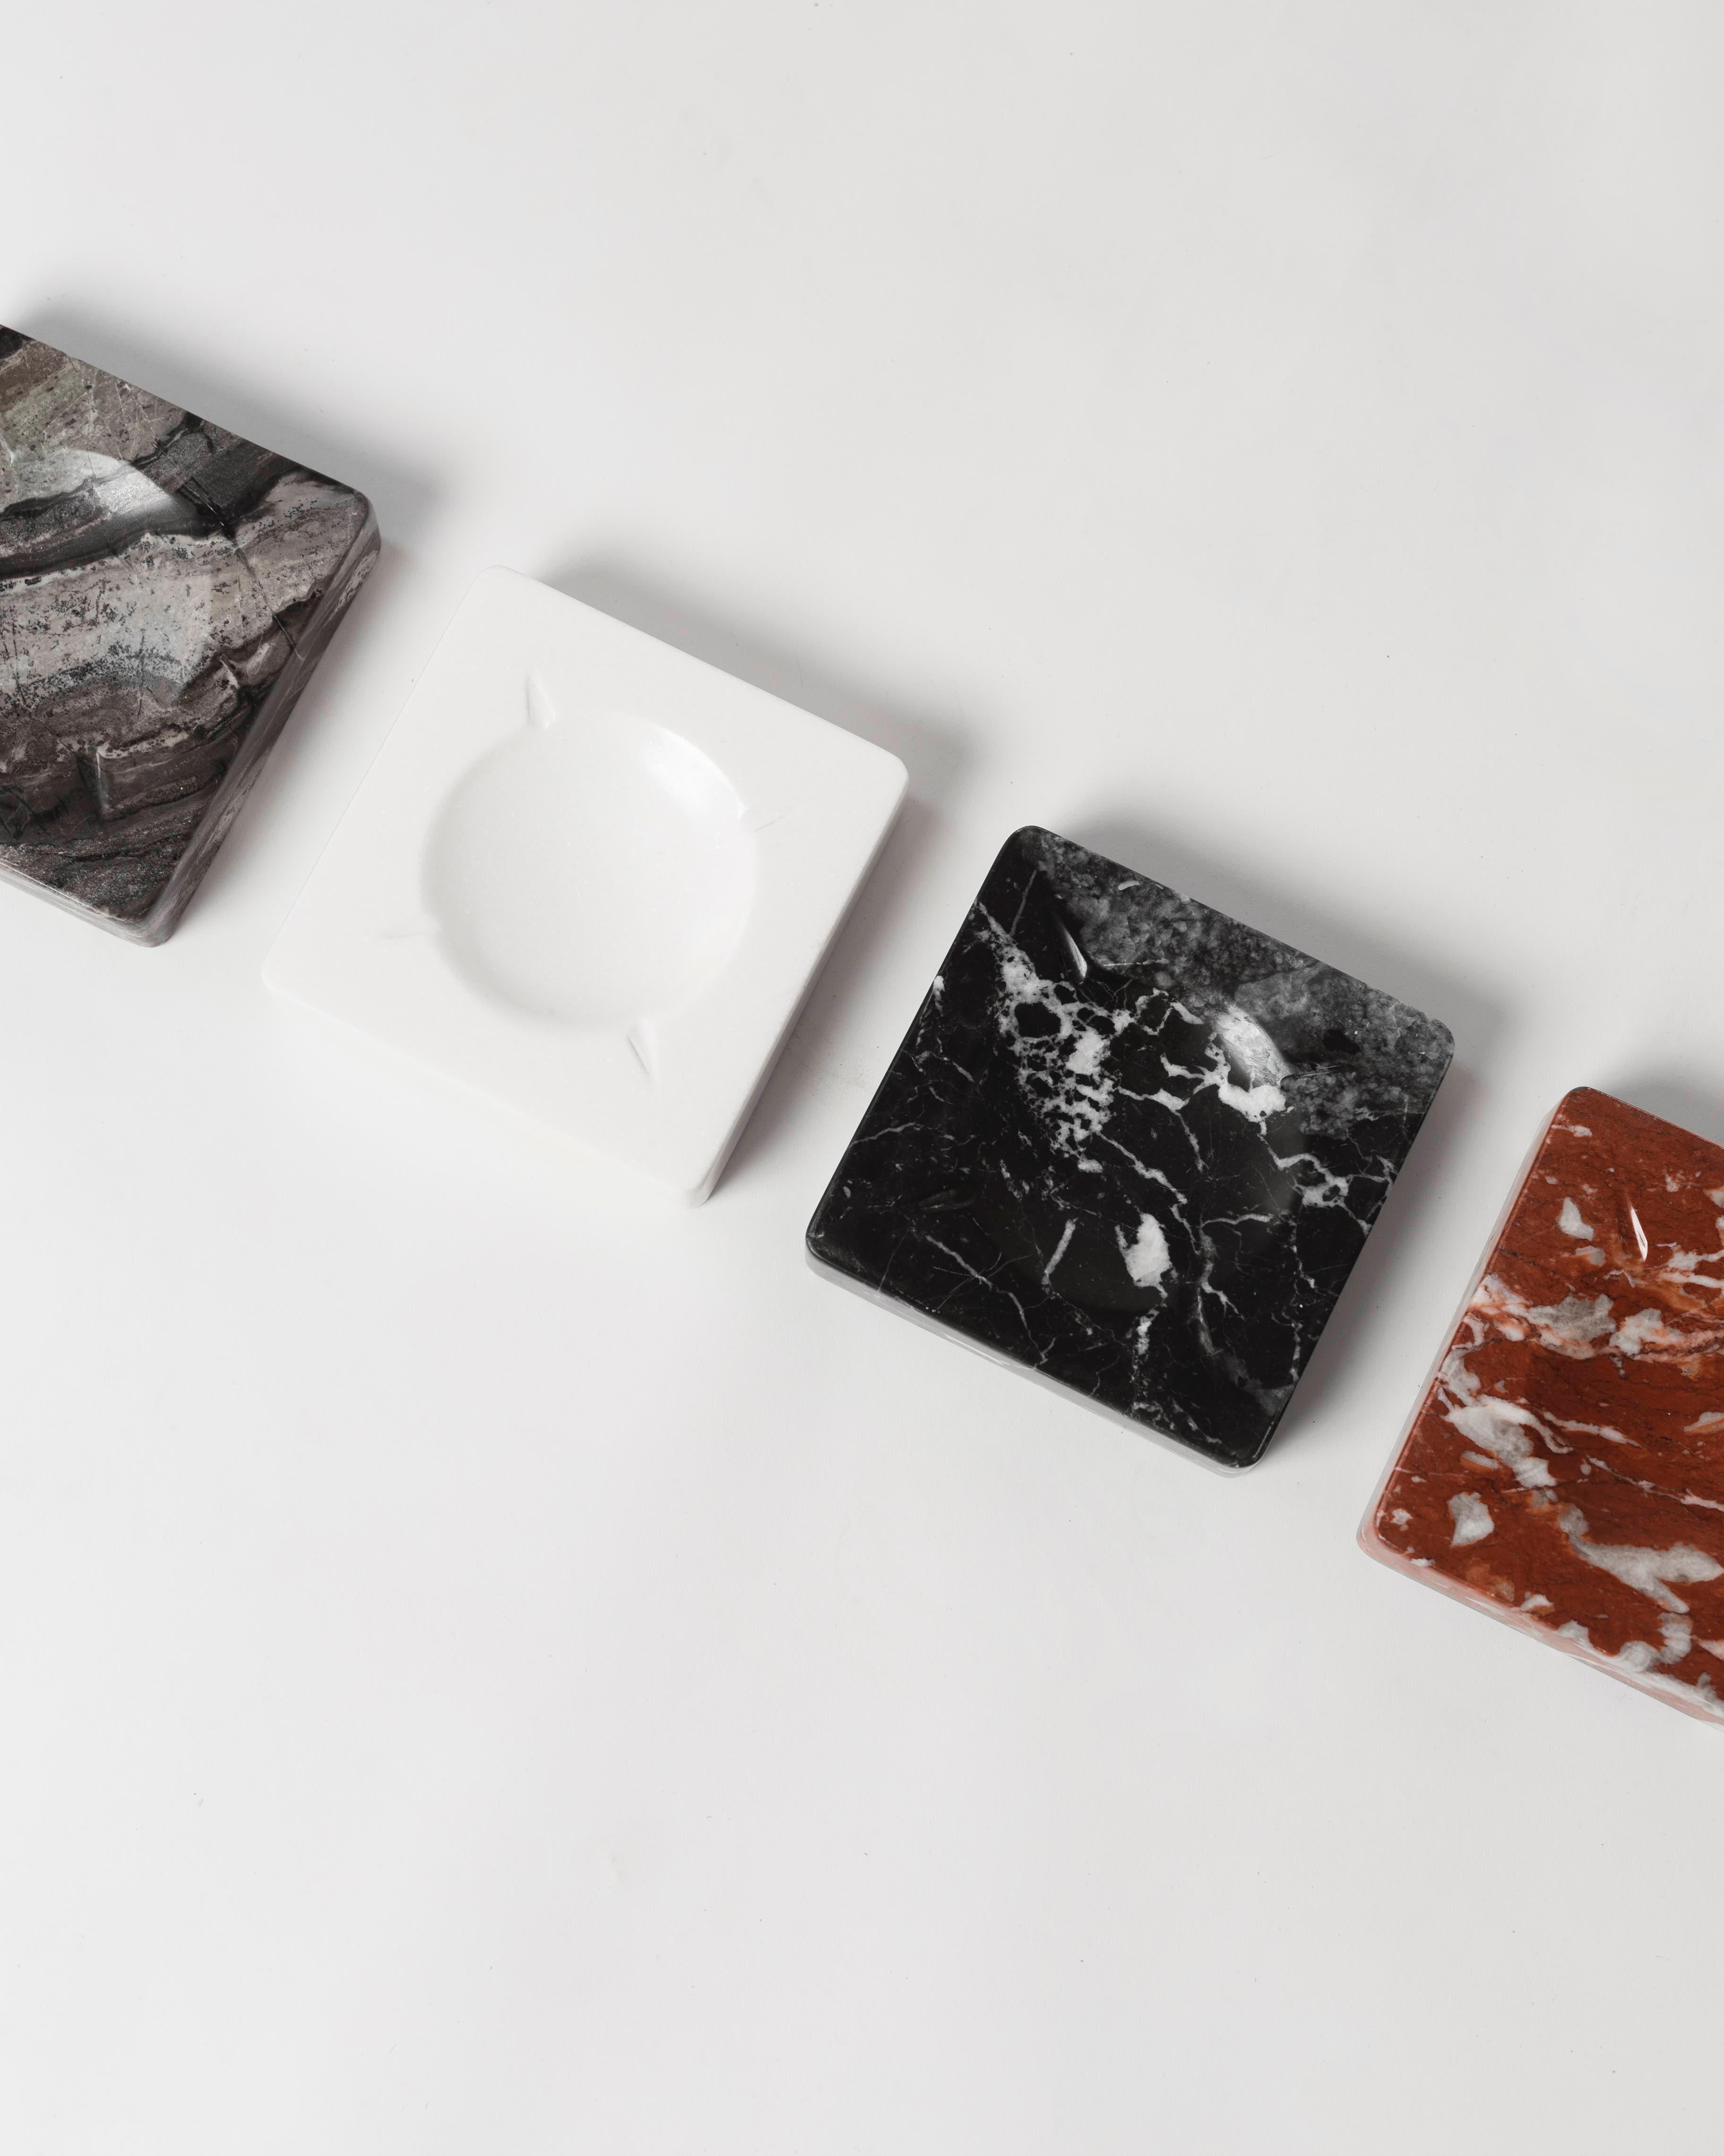 One of our best-selling and iconic pieces from Loyzaga Design, the Ruhlmann ashtrays come in different sizes and styles, as well as types of marble combinations.
These are hand carved by mexican artisans at our studio in Mexico City. The materials,